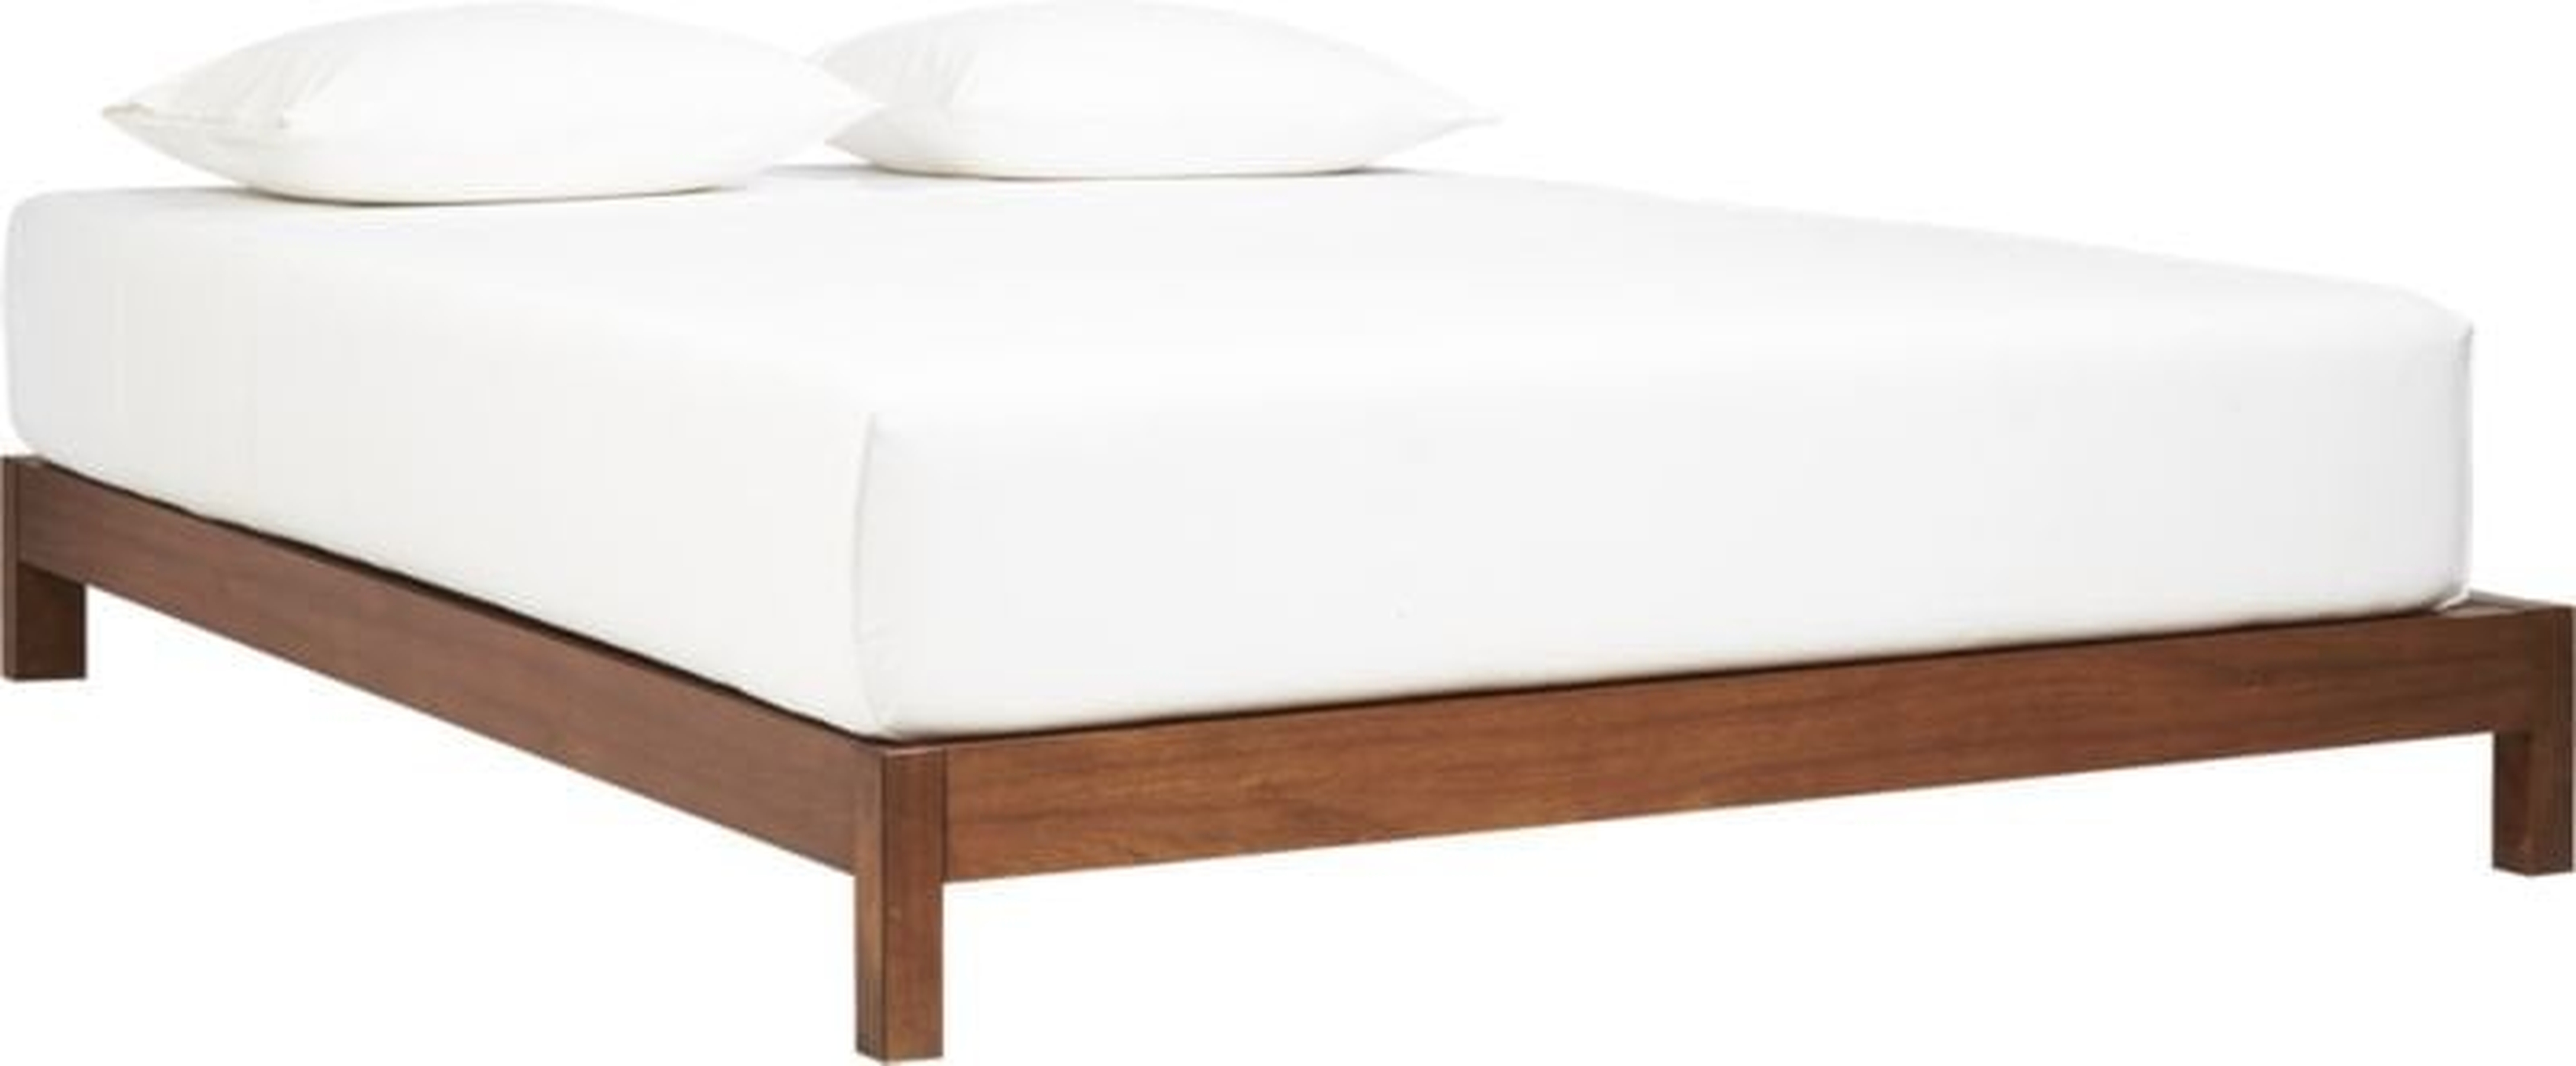 Simple Wood Bed Base King - CB2